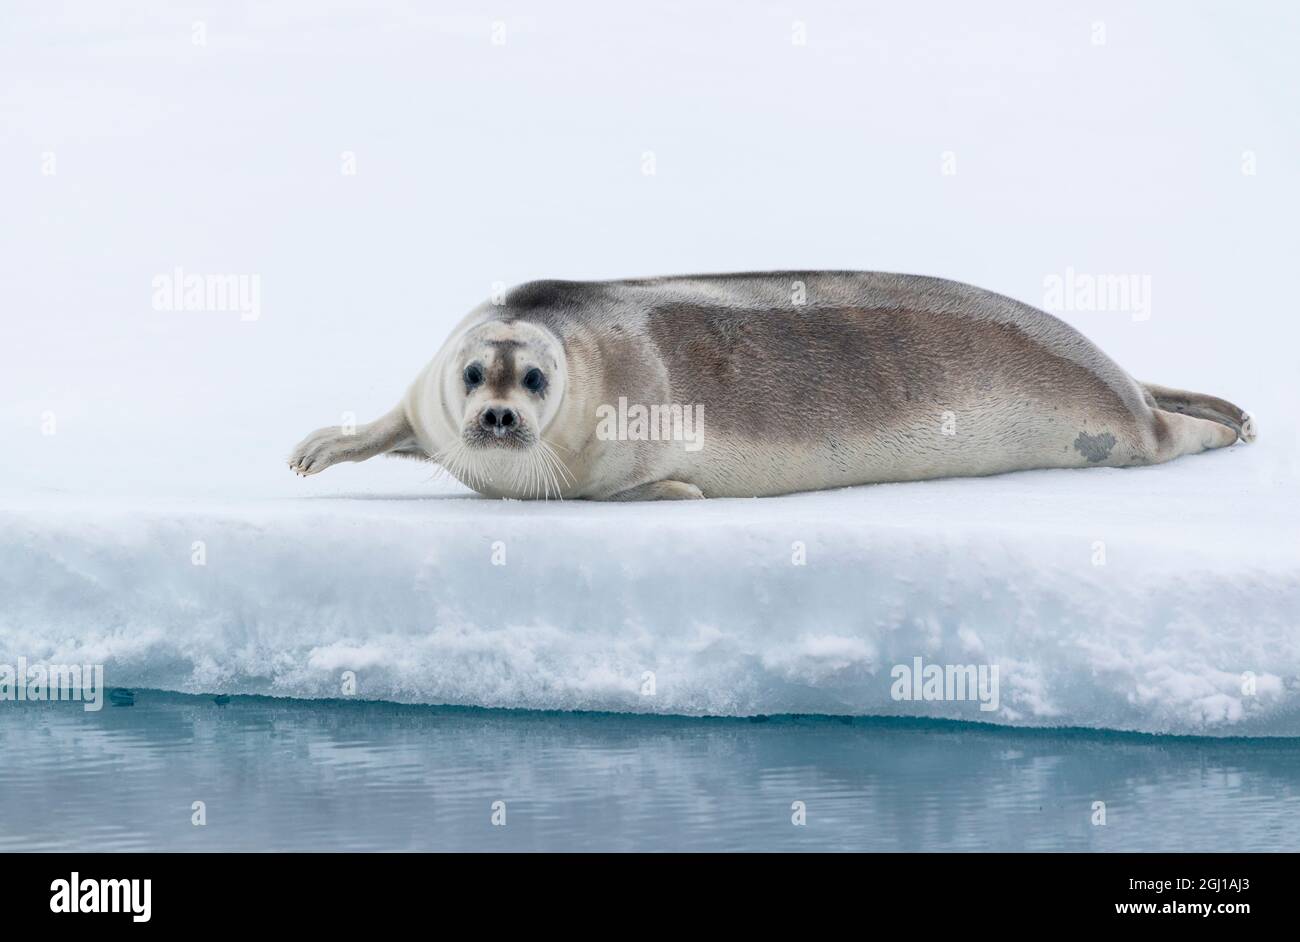 Arctic, north of Svalbard. A portrait of a young bearded seal hauled out on the pack ice. Stock Photo